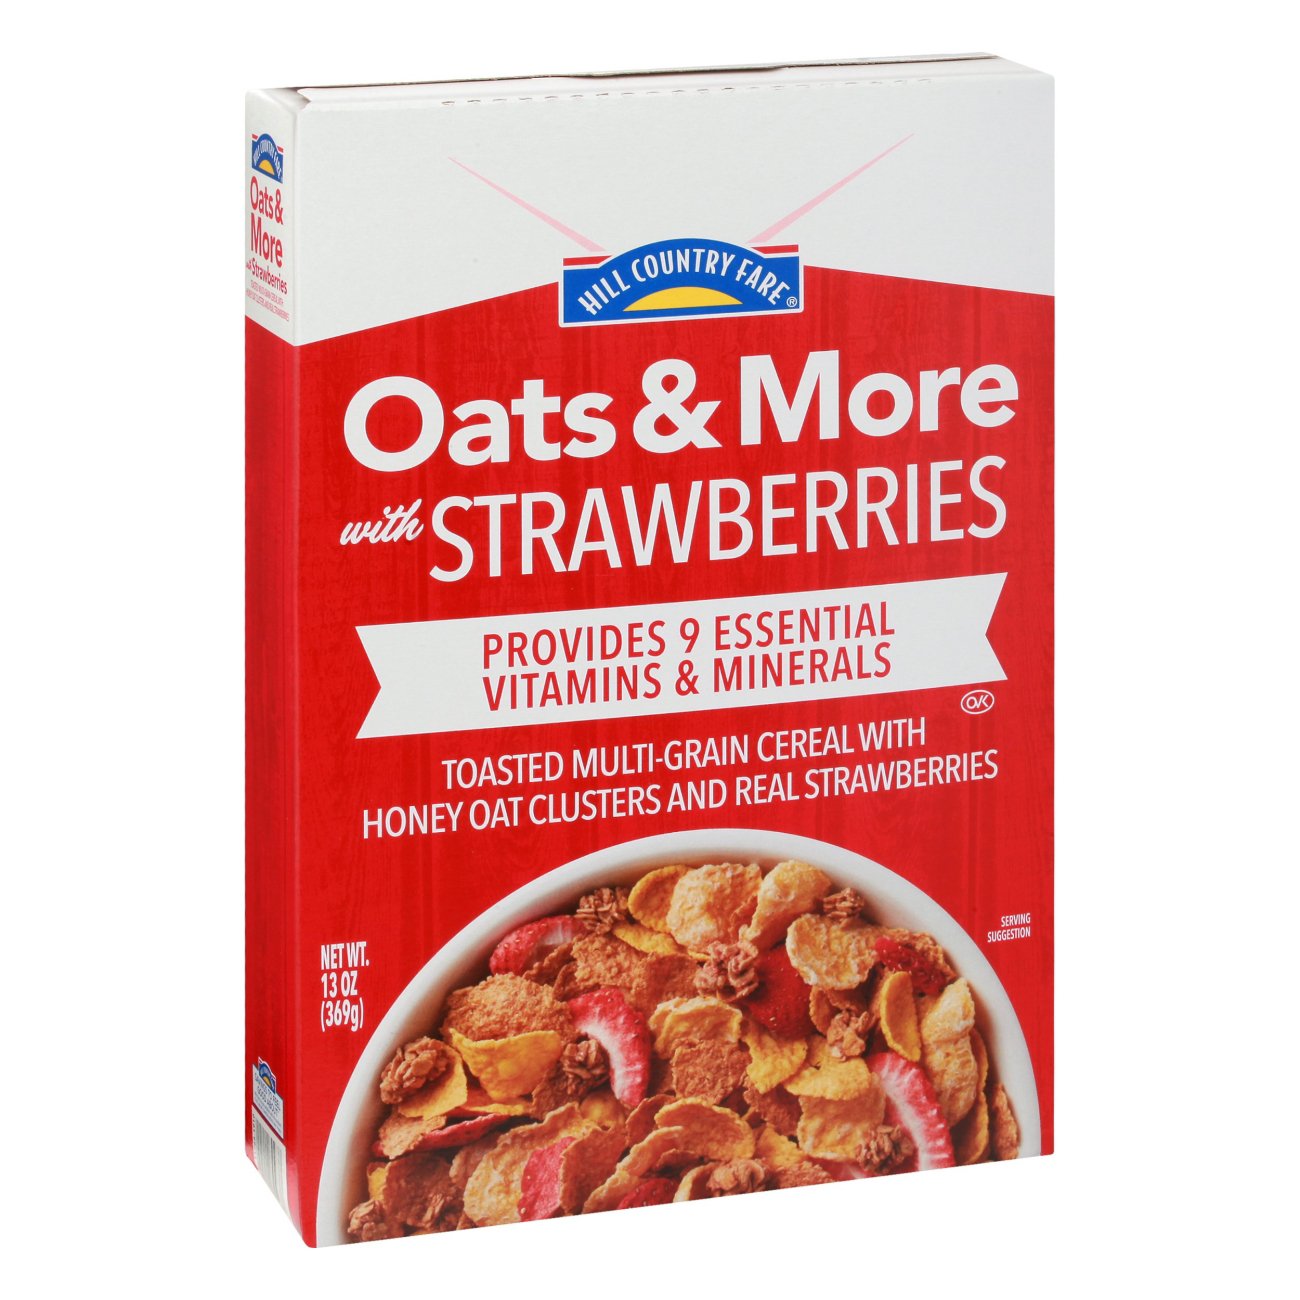 Hill Country Fare Oats & More Cereal with Strawberries - Shop Cereal at ...